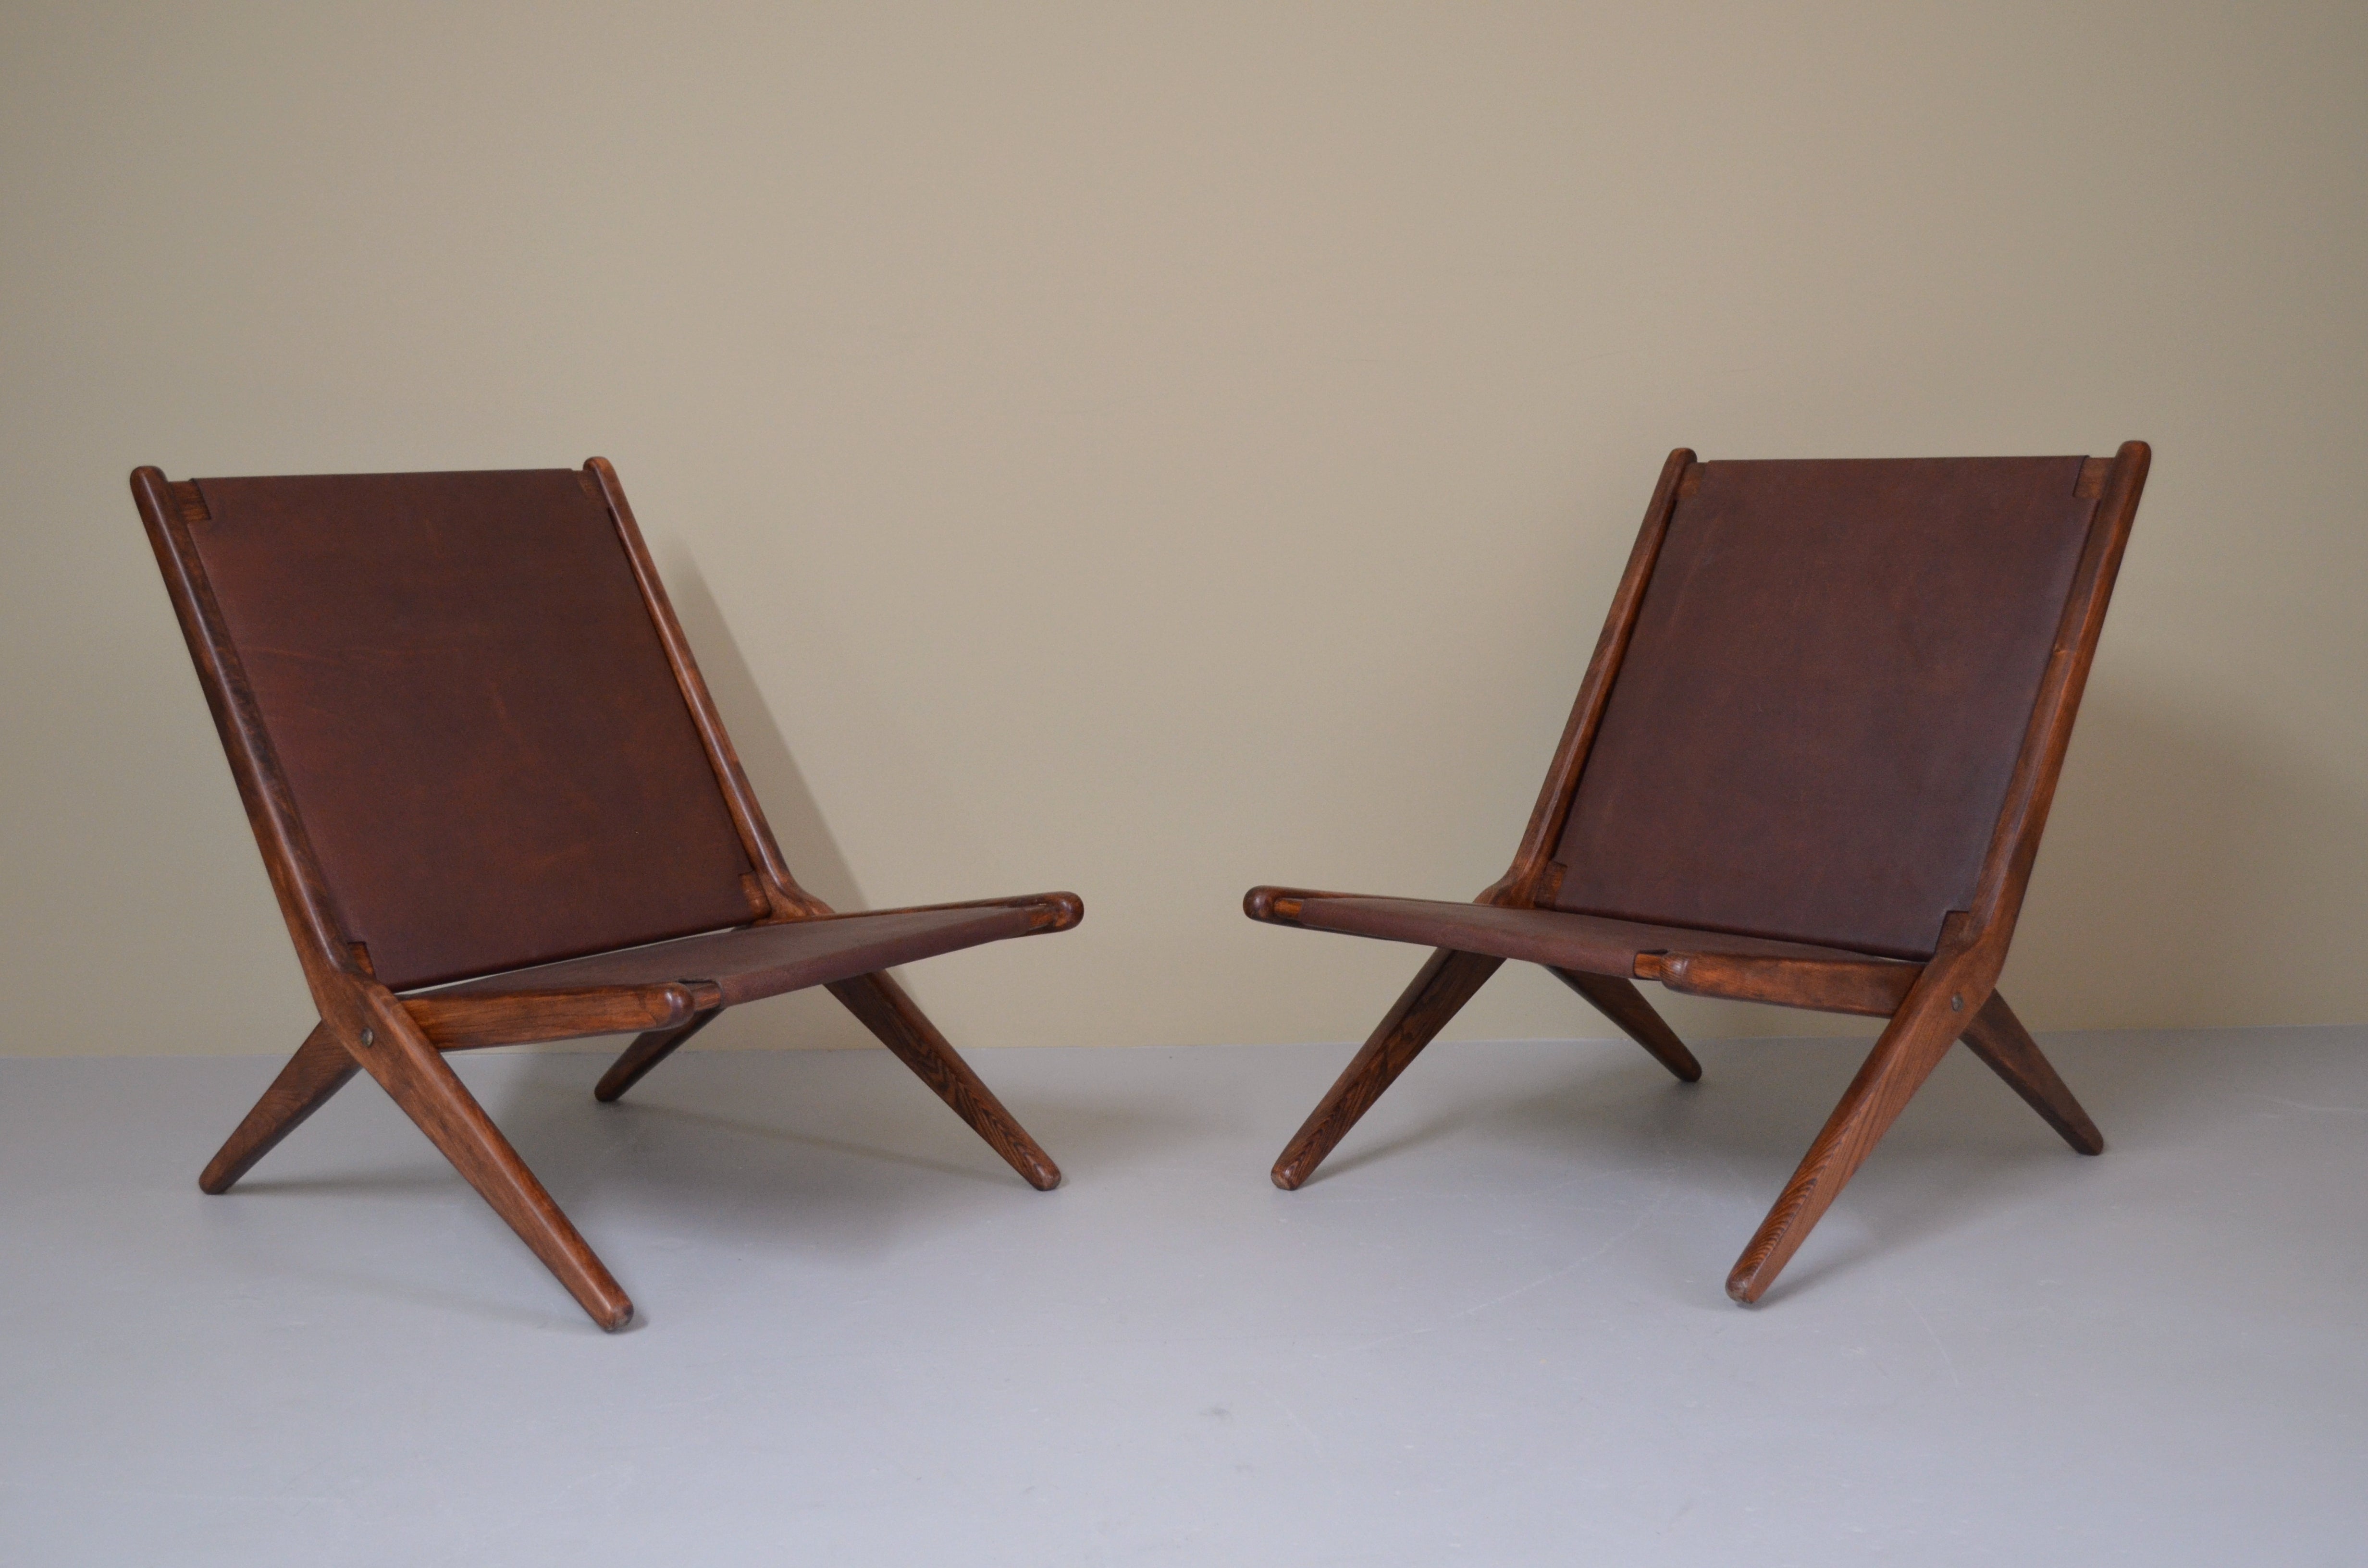 Pair of Danish Scissor Chairs in Walnut and Leather